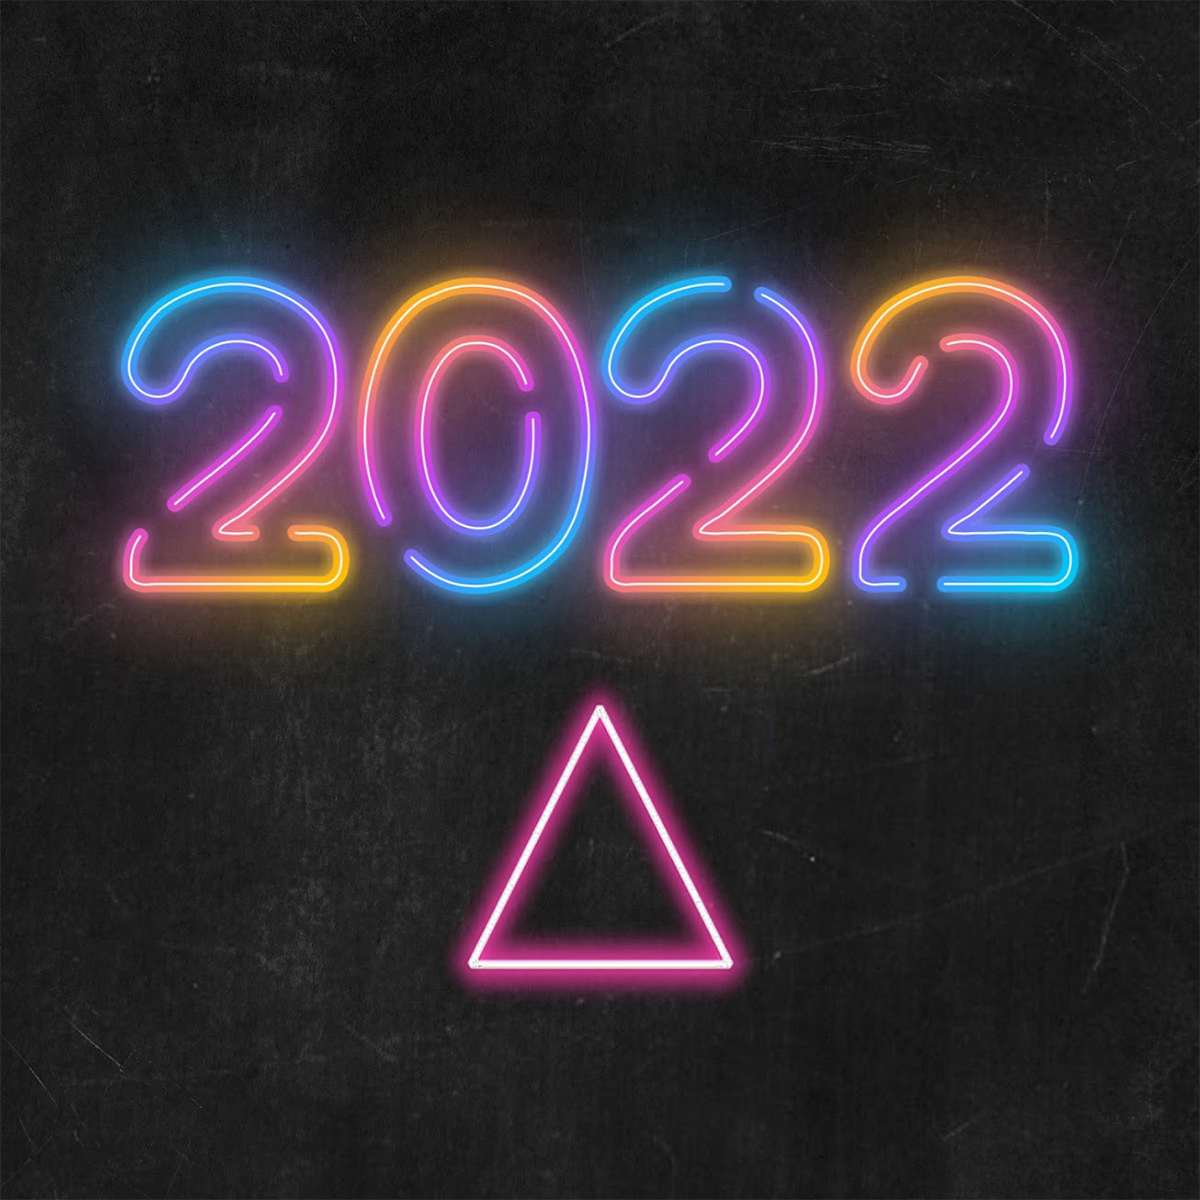 2022 A Playlist cover art